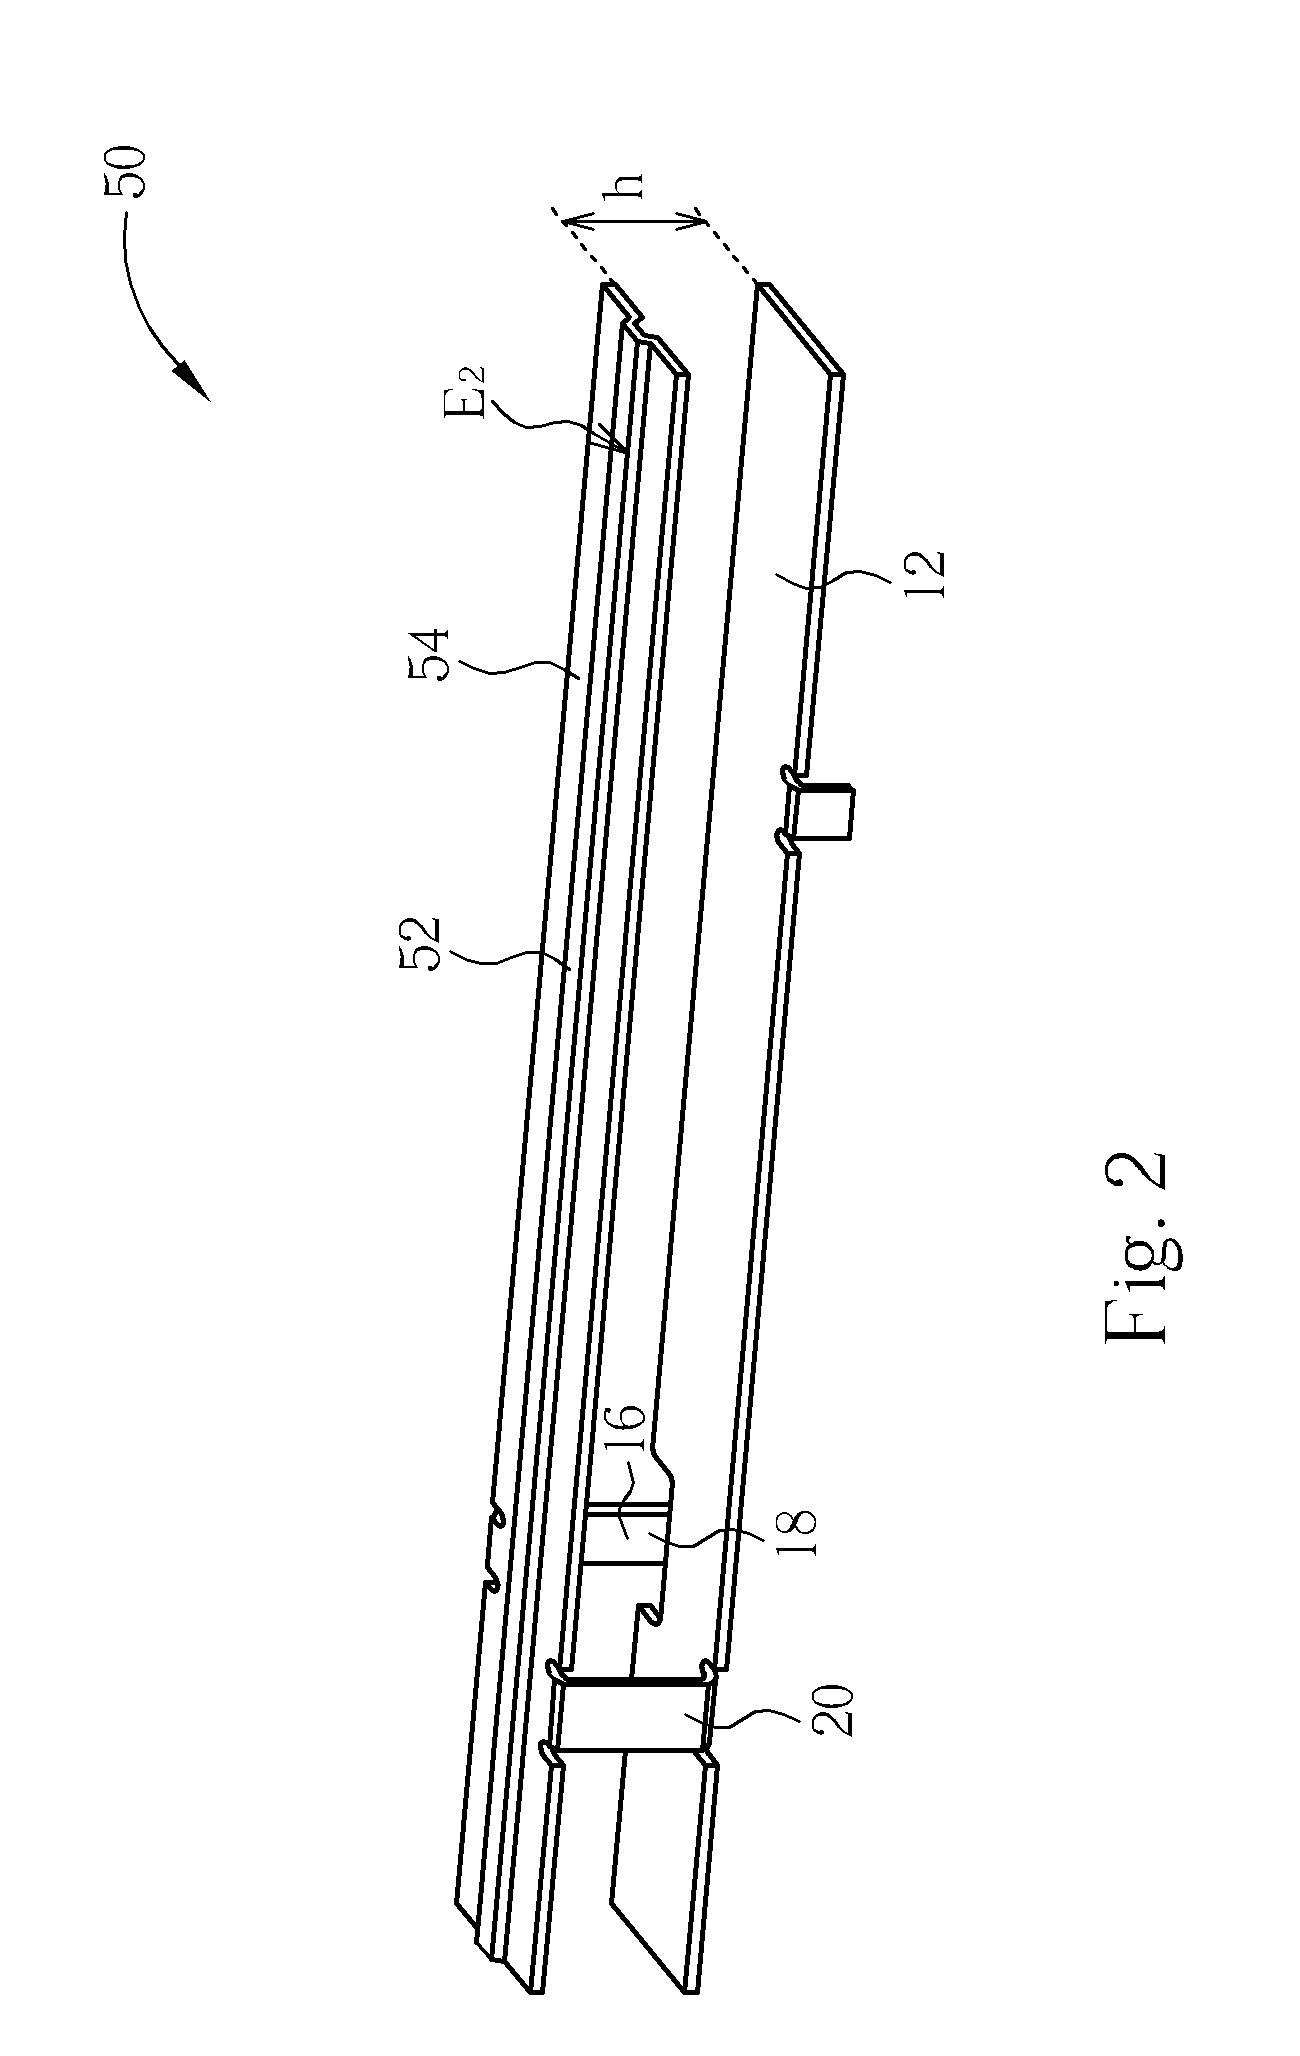 Planner inverted-F antenna having a rib-shaped radiation plate